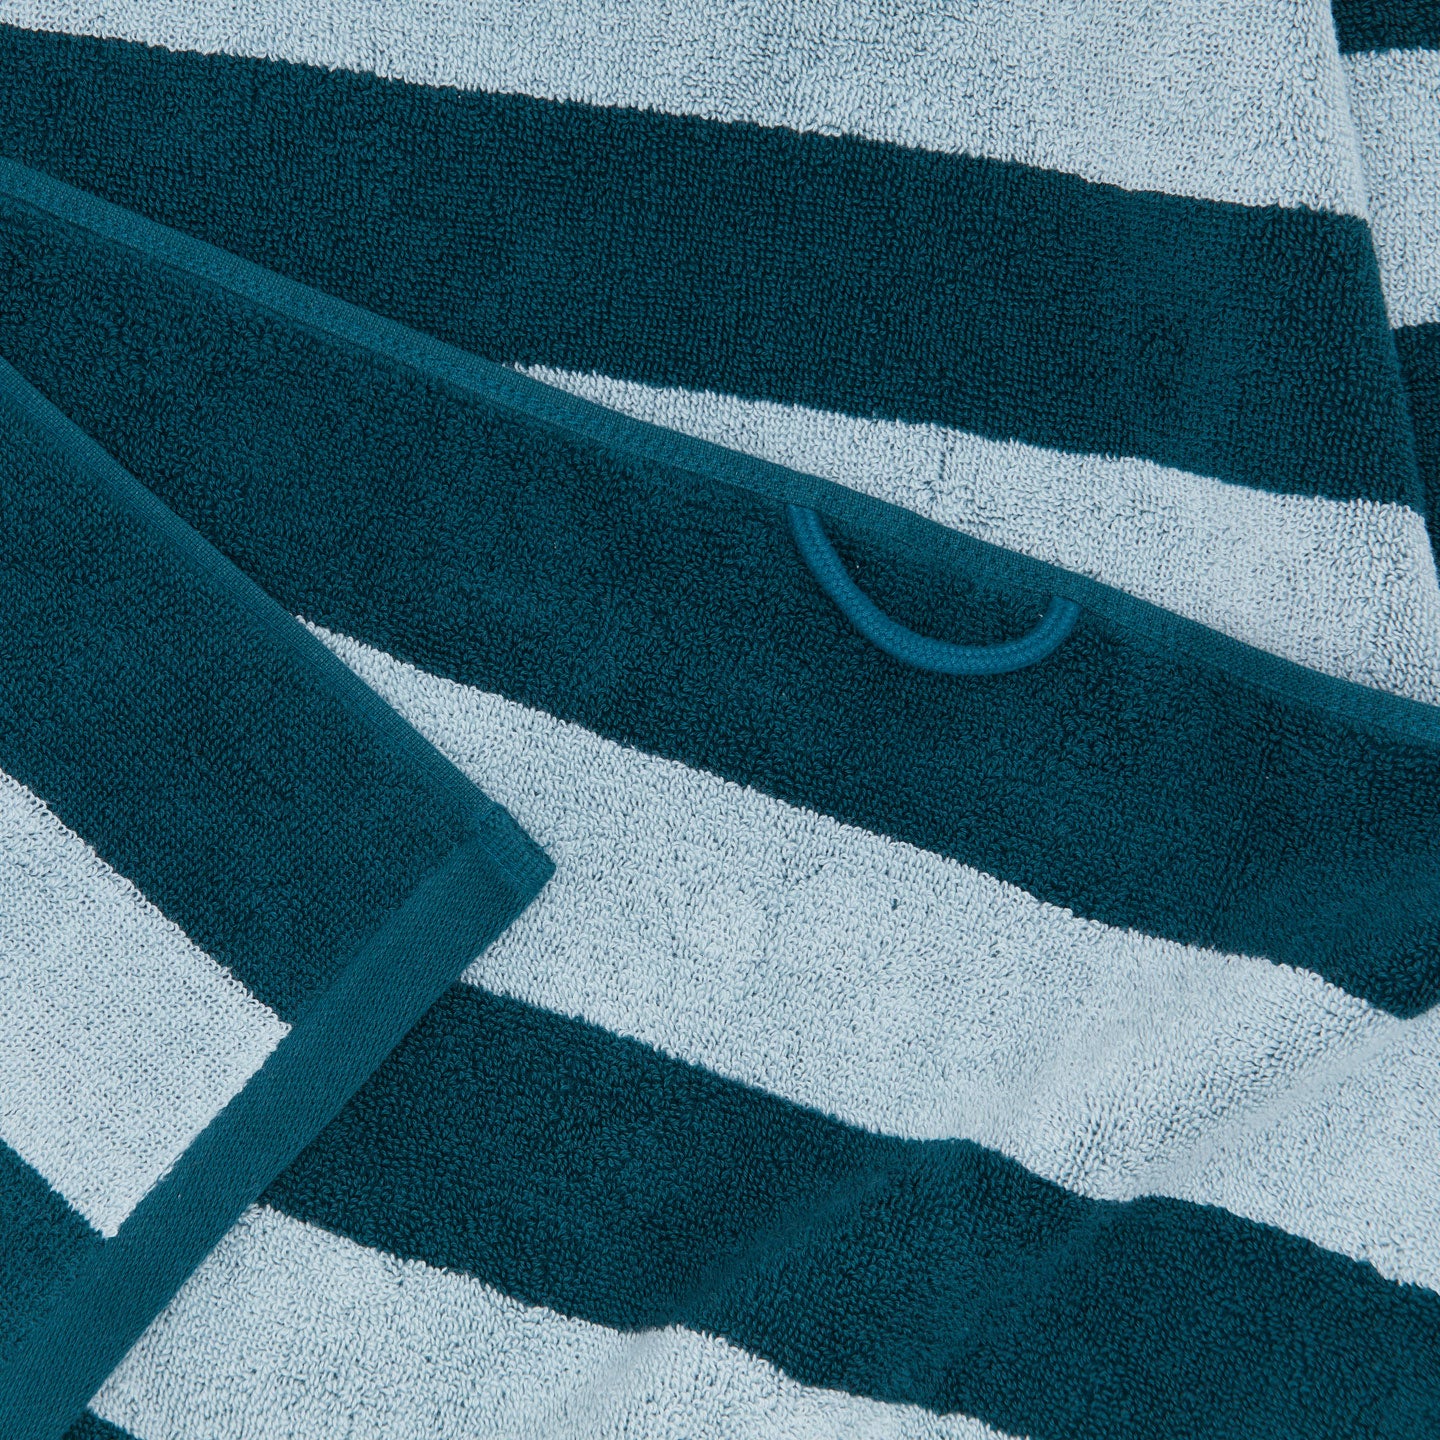 A close up of a striped sky and peacock terry bath towel with a hanging loop.